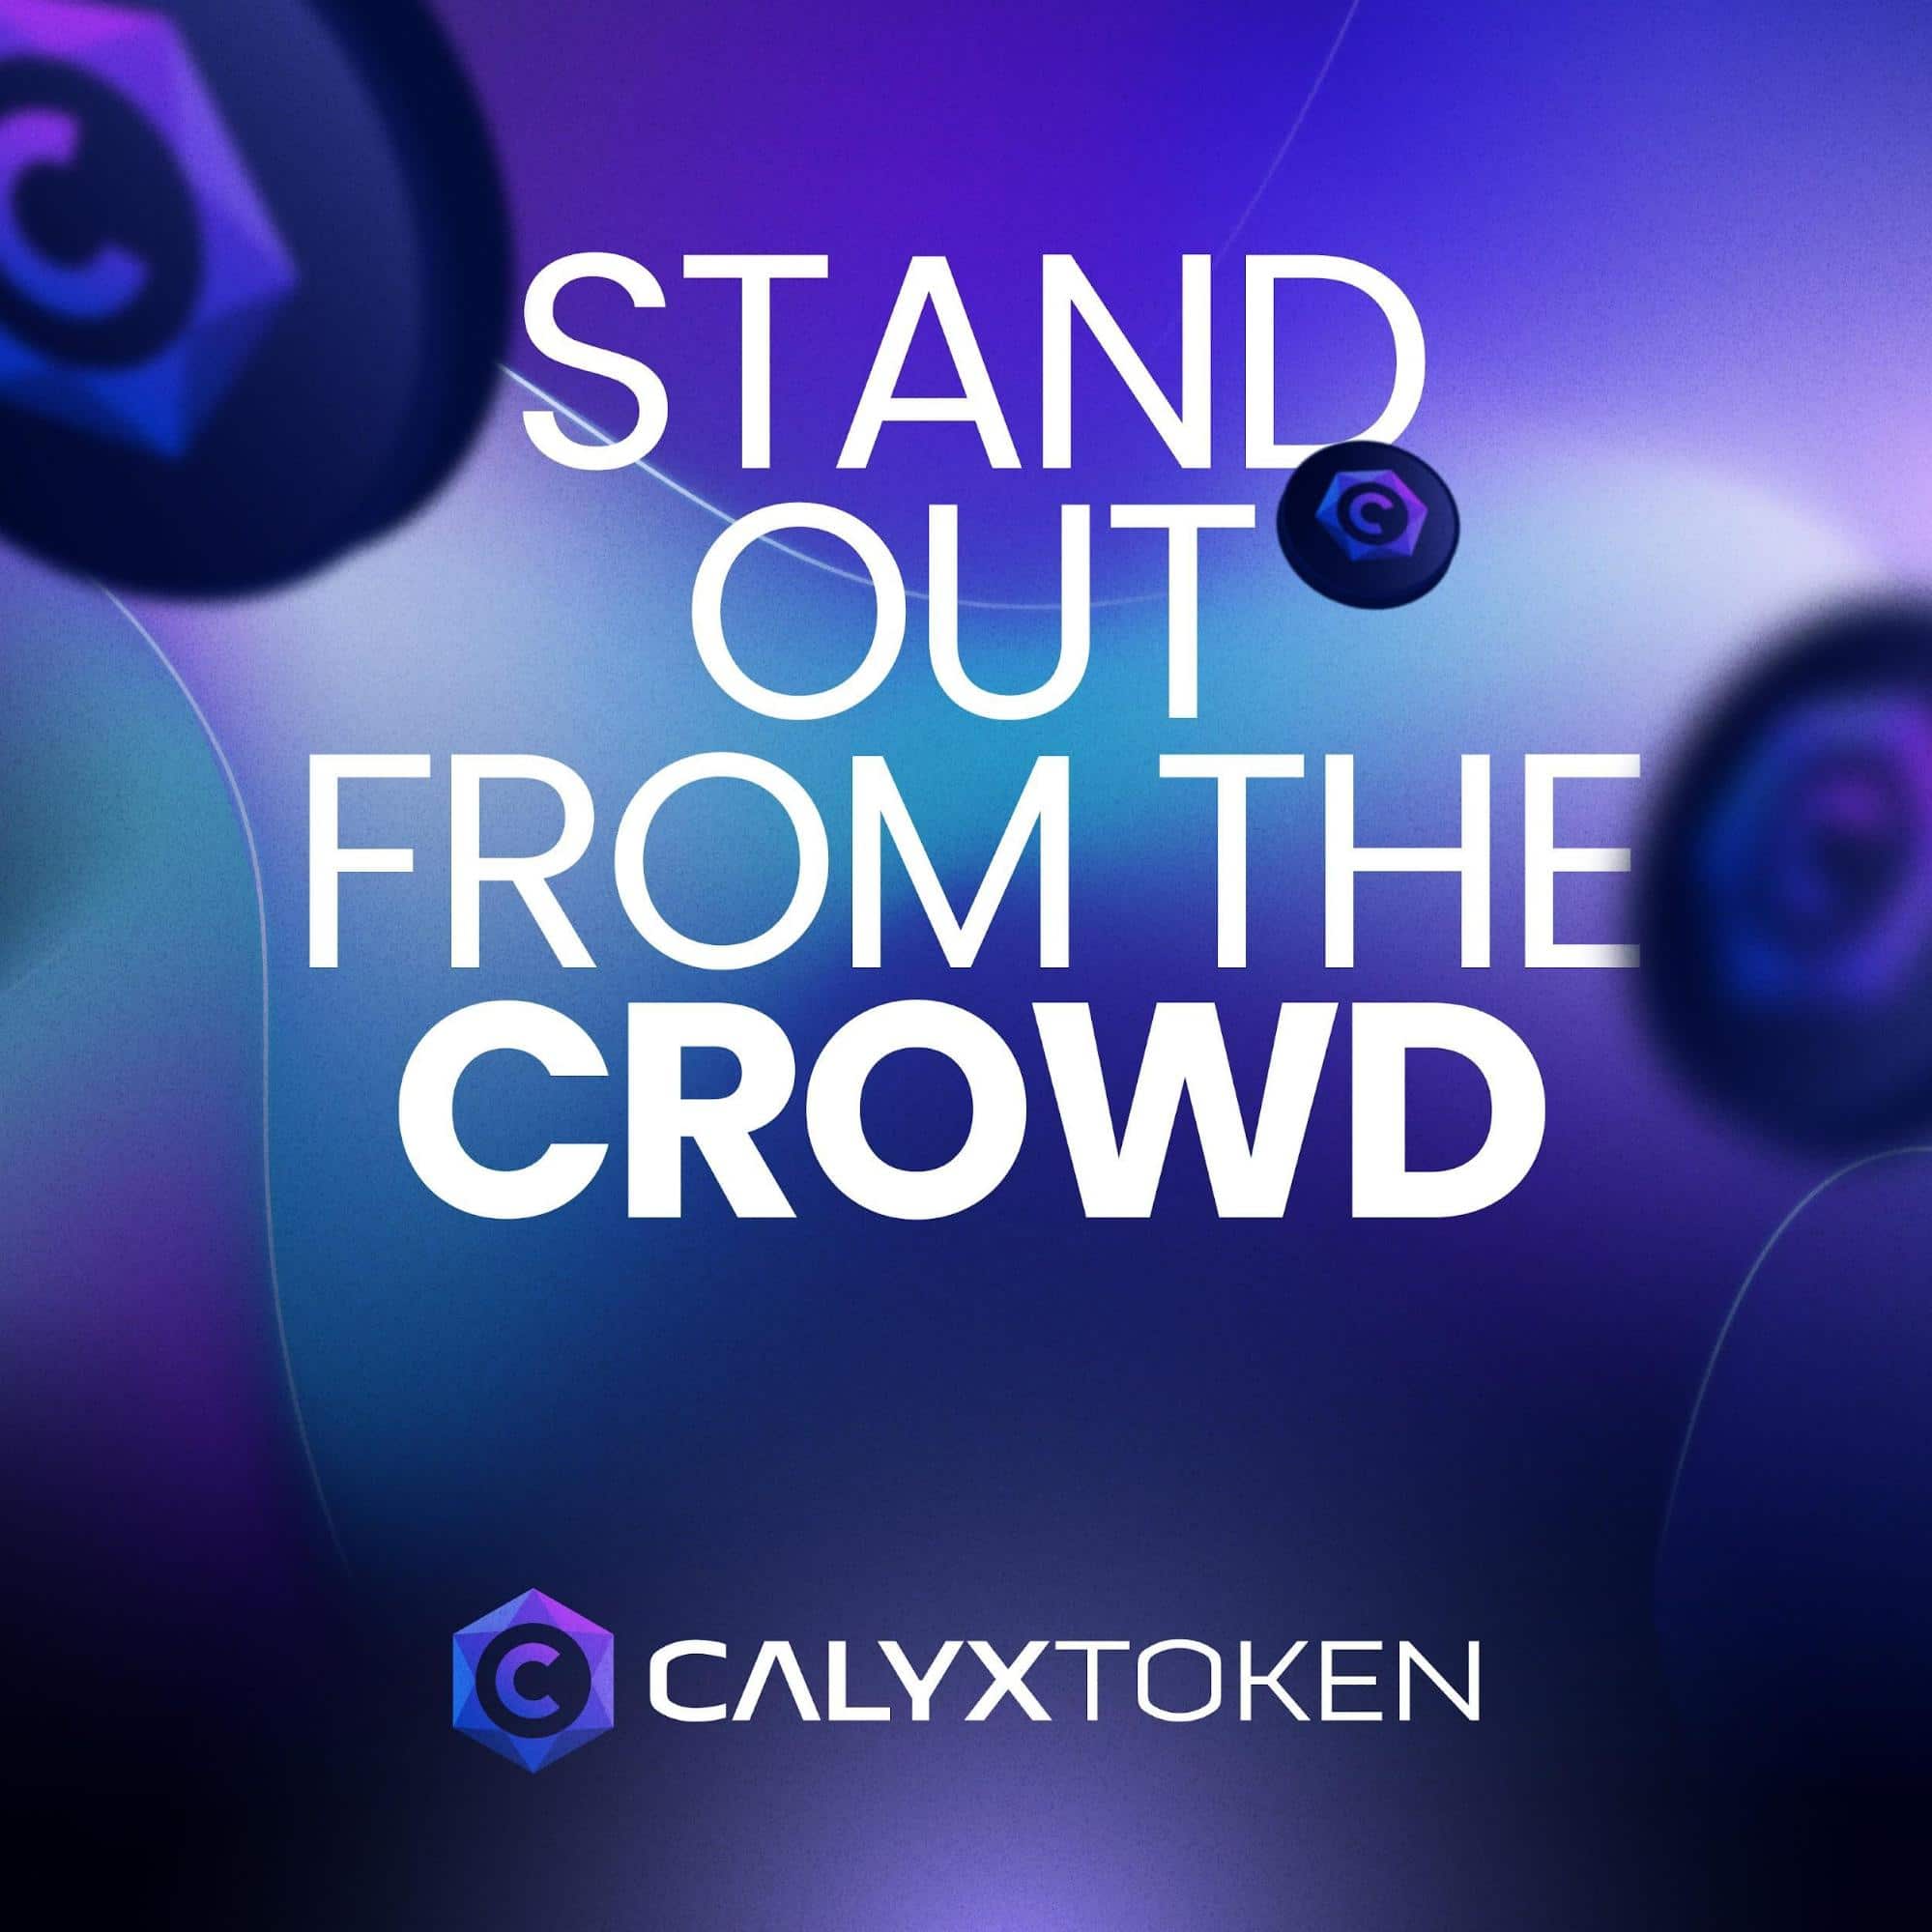 Cardano, Ethereum and the Unique Calyx Token Are Promising Tokens for New Crypto